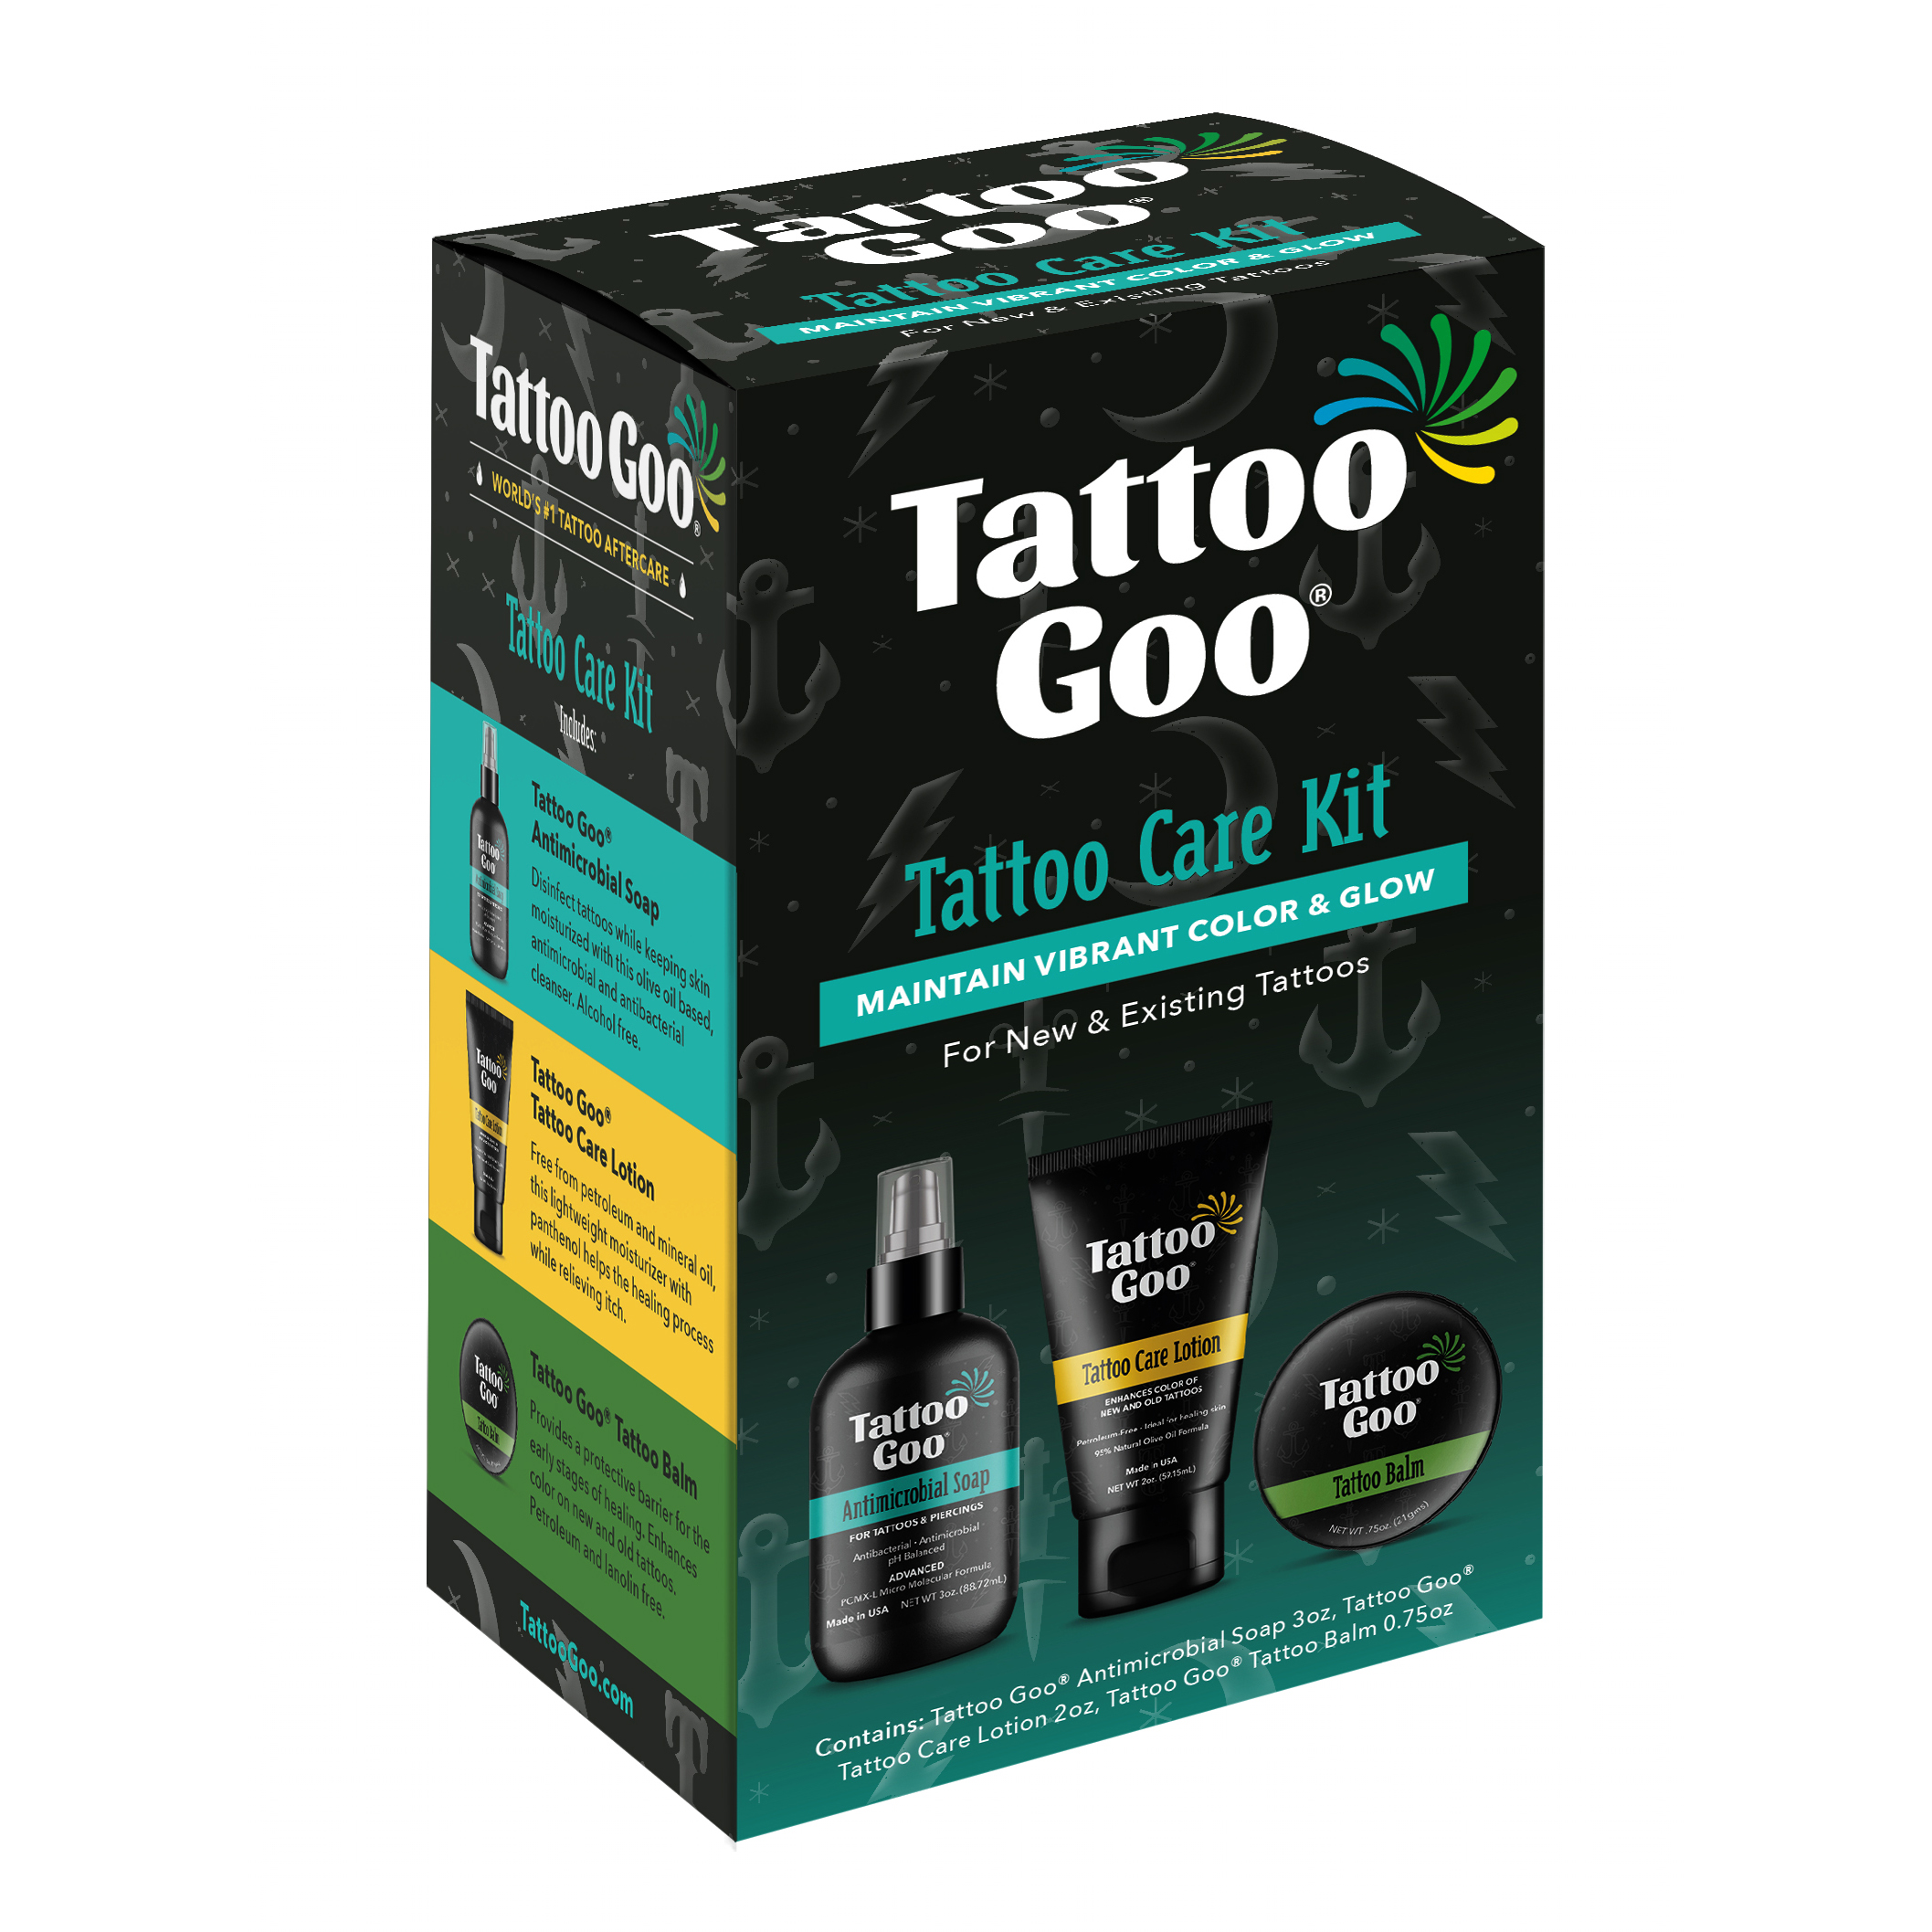 Antibacterial Tattoo Goo cleansing soap for piercings and tattoos